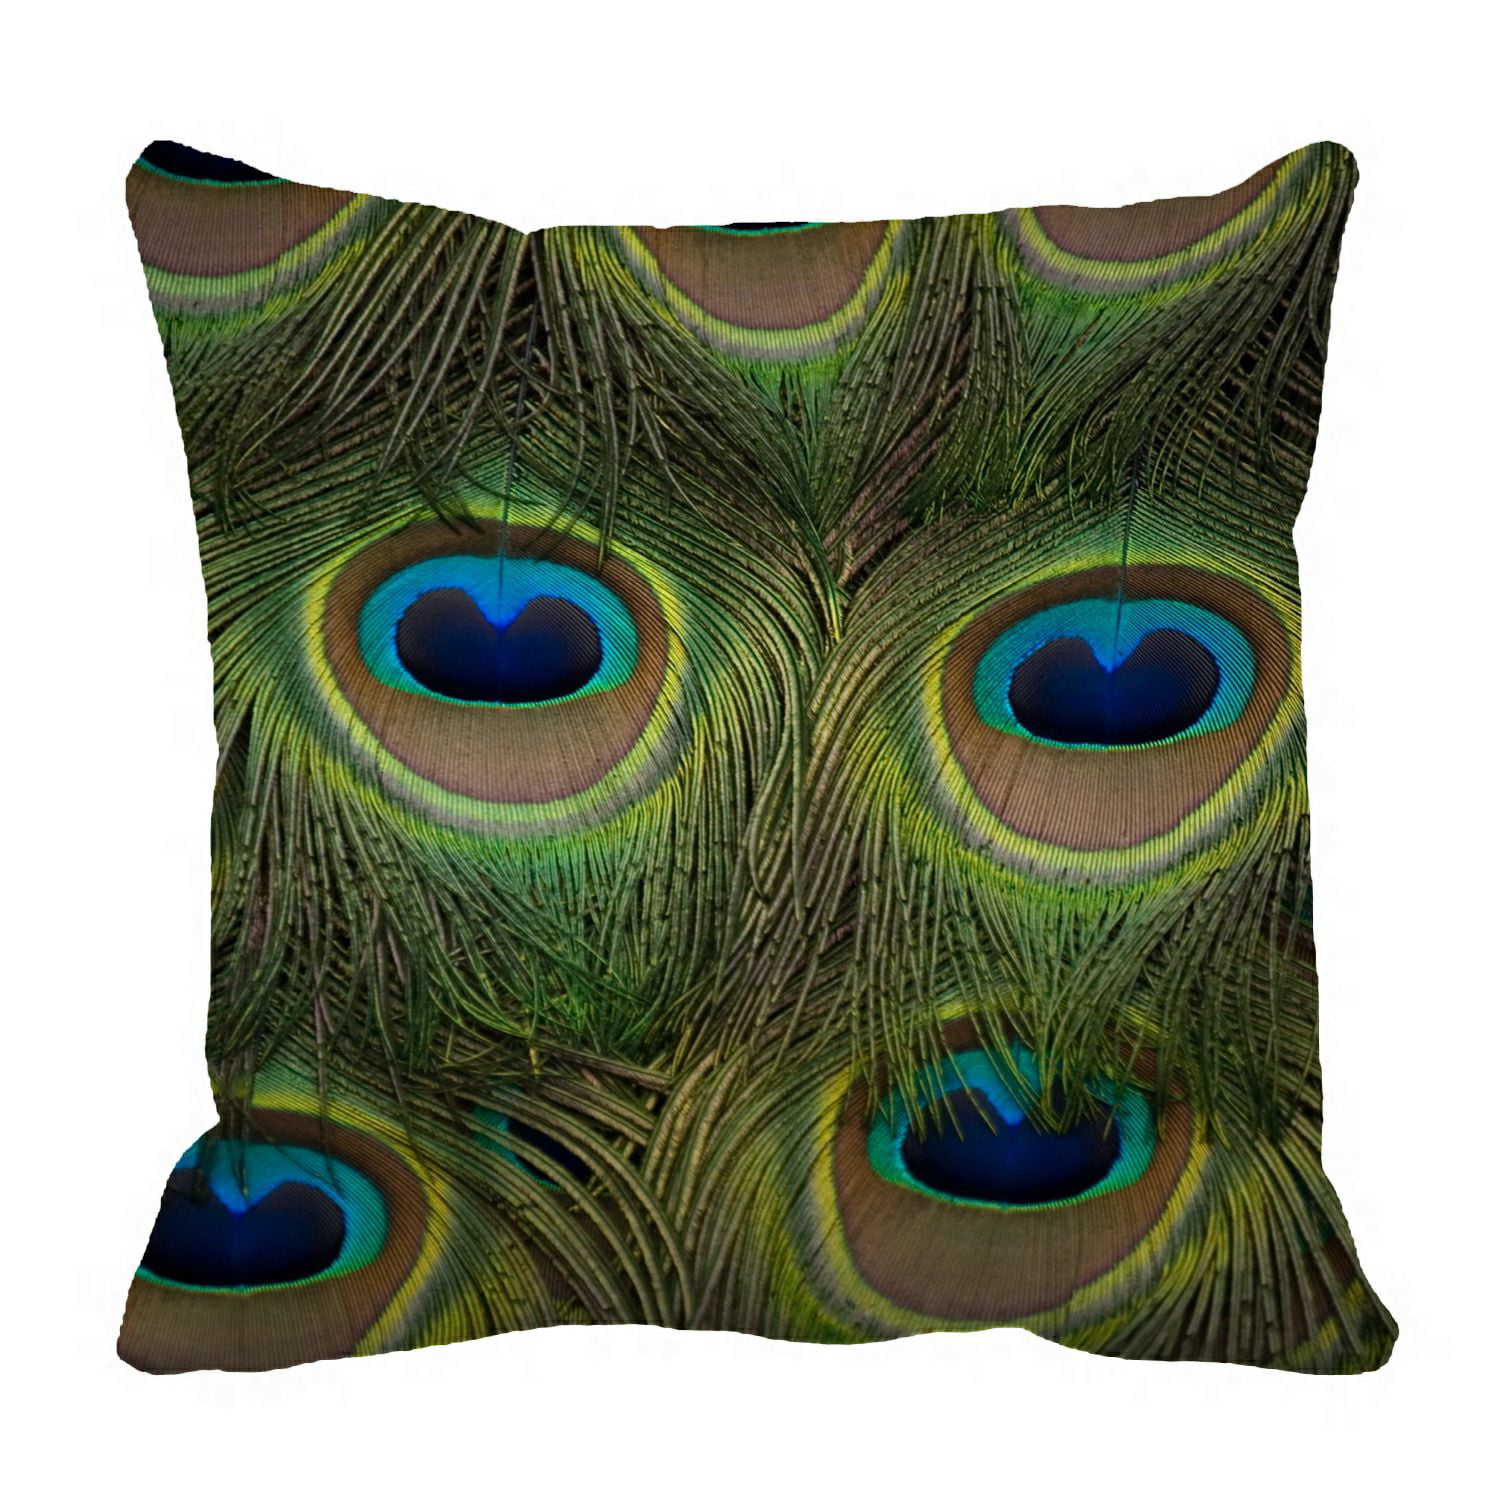 18" Animal Portrait Cushion Cover Turquoise Peacock Decorative Throw Pillow Case 